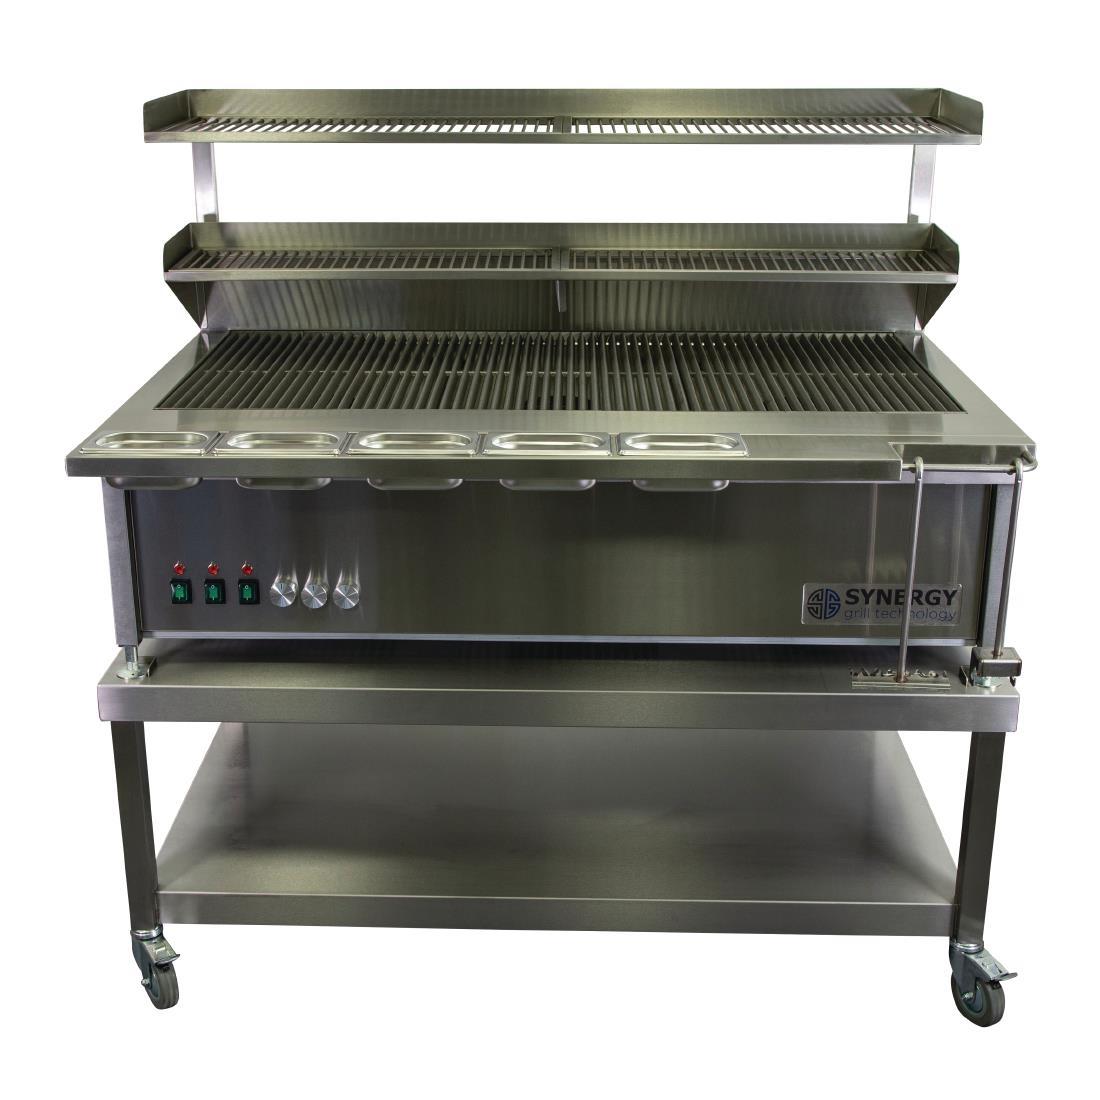 Synergy ST1300 Grill with Garnish Rail and Slow Cook Shelf - FD493  - 3